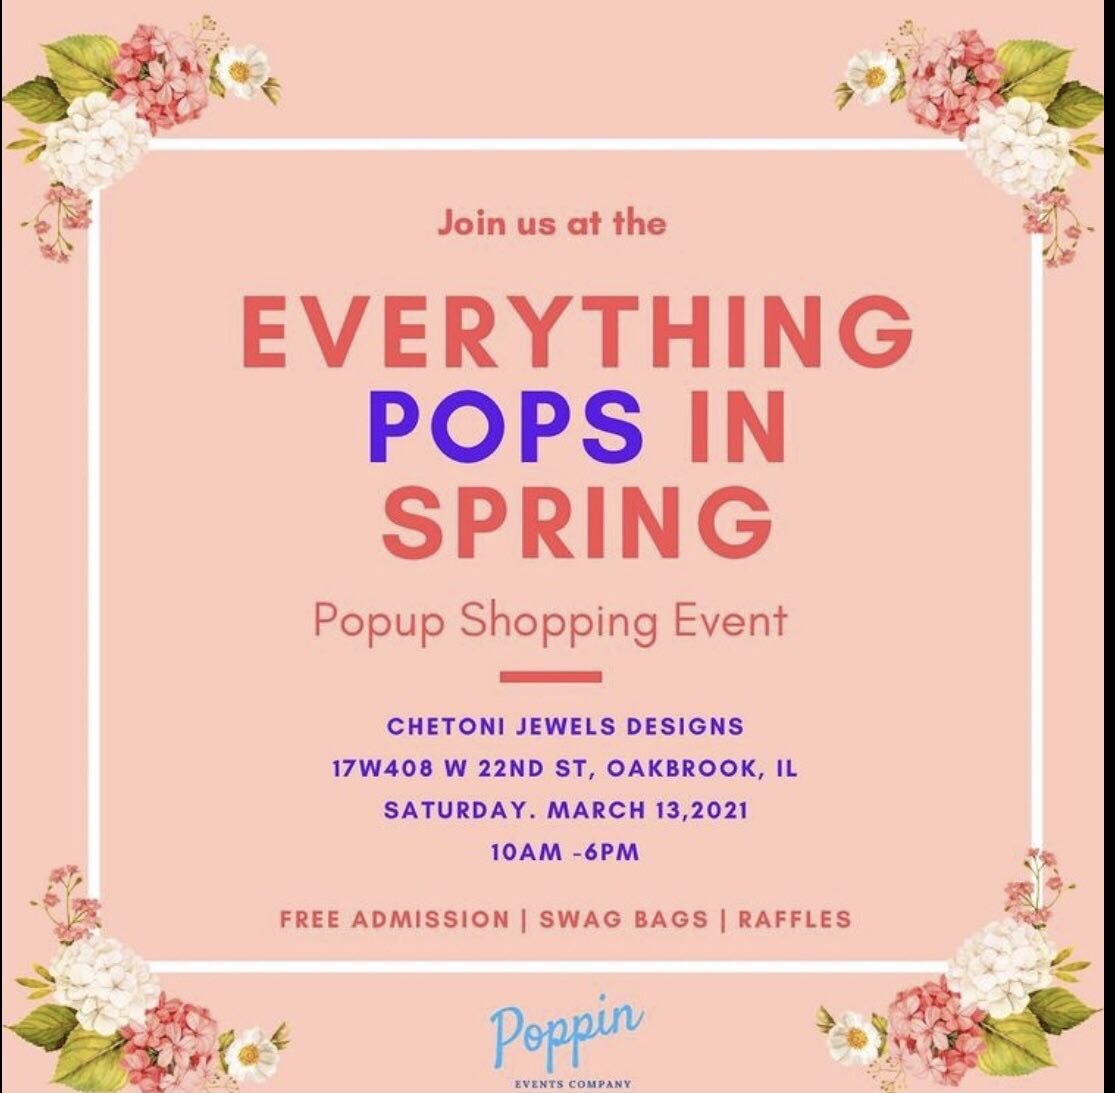 Come see us @poppingevents Spring pop up shop 💋❤️